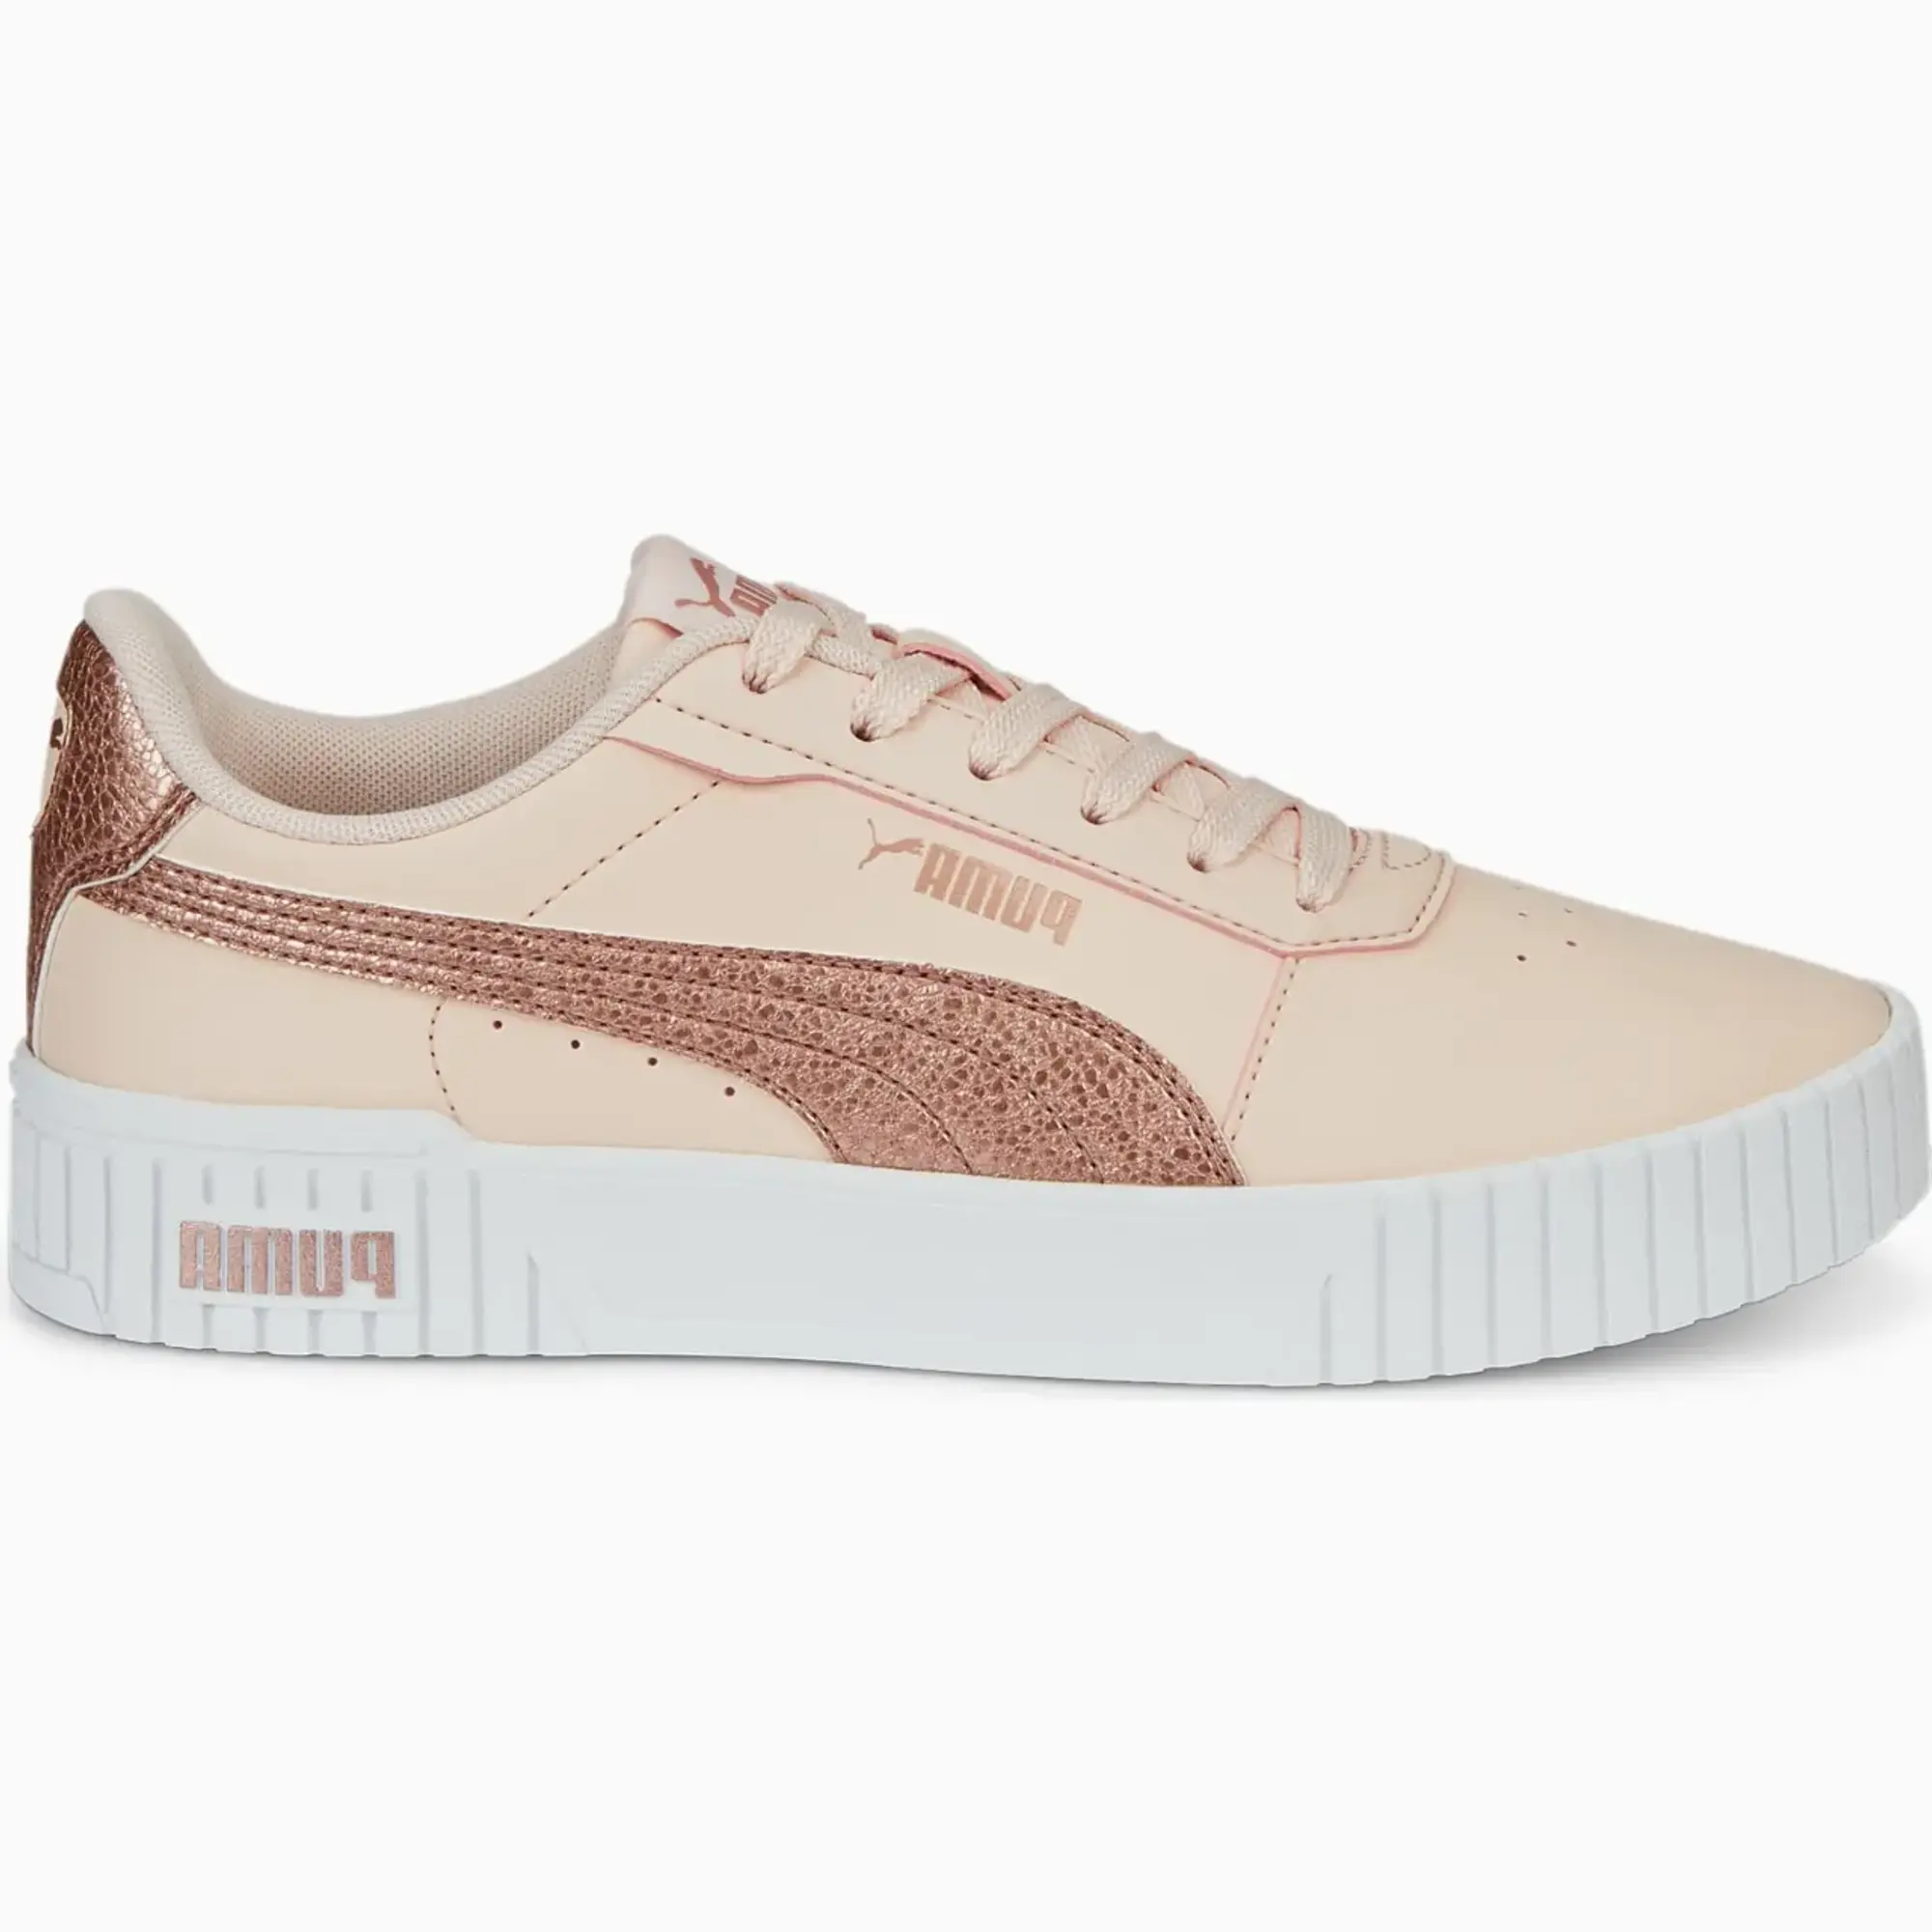 Puma Womens Carina 2.0 Distressed Trainers - Pink Leather